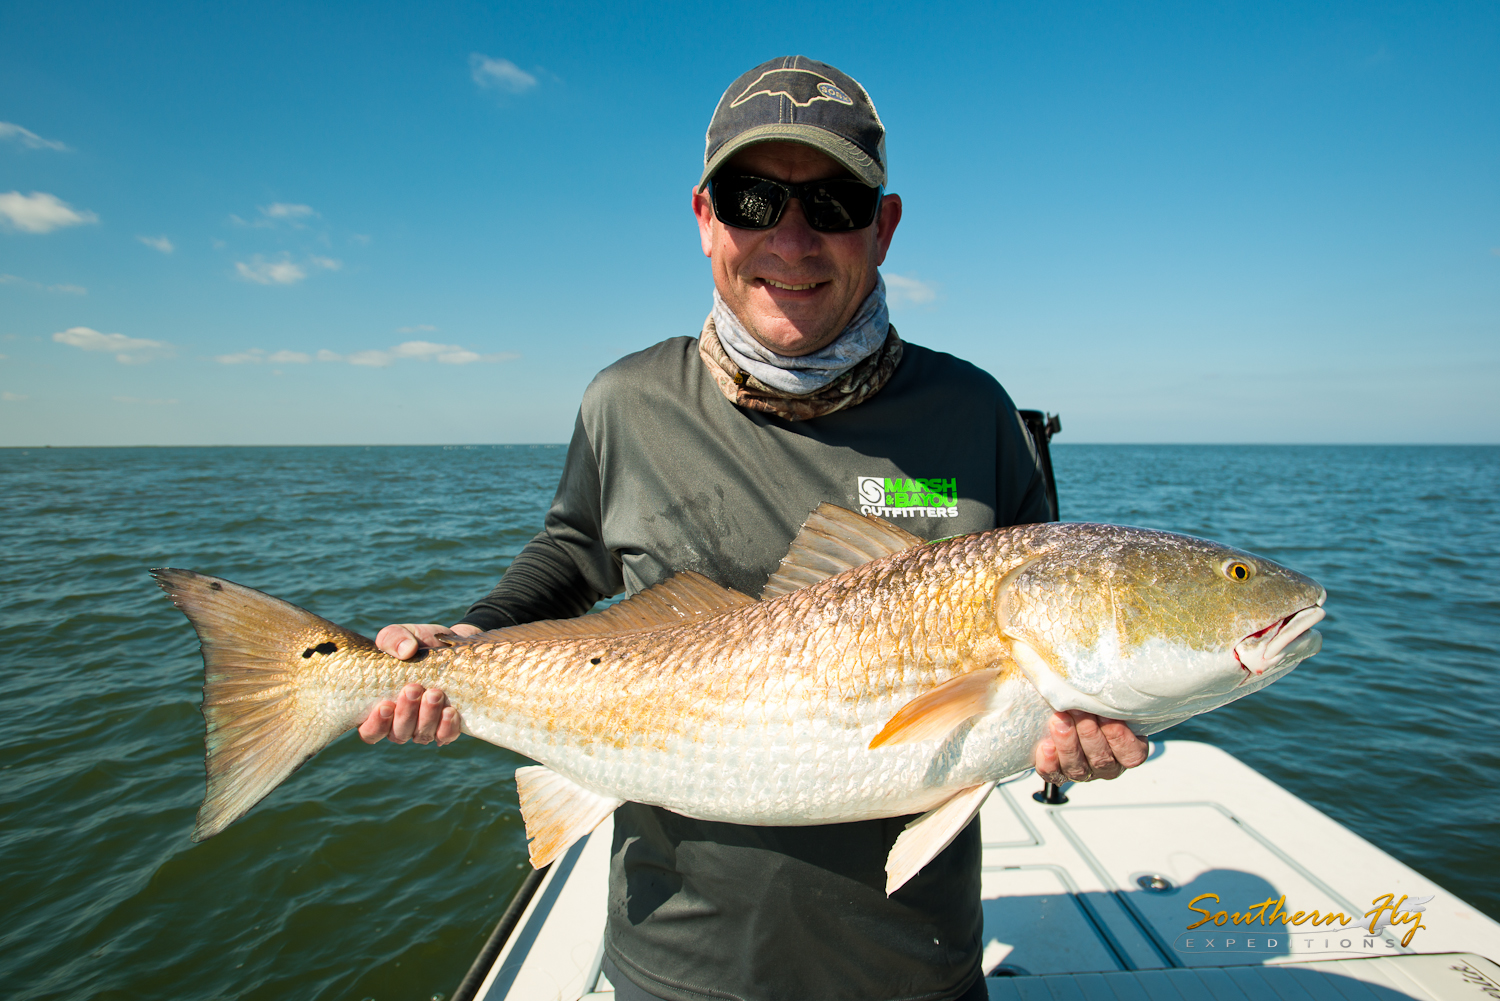 Fly fishing louisiana with Southern Fly Expeditions and captain brandon keck 